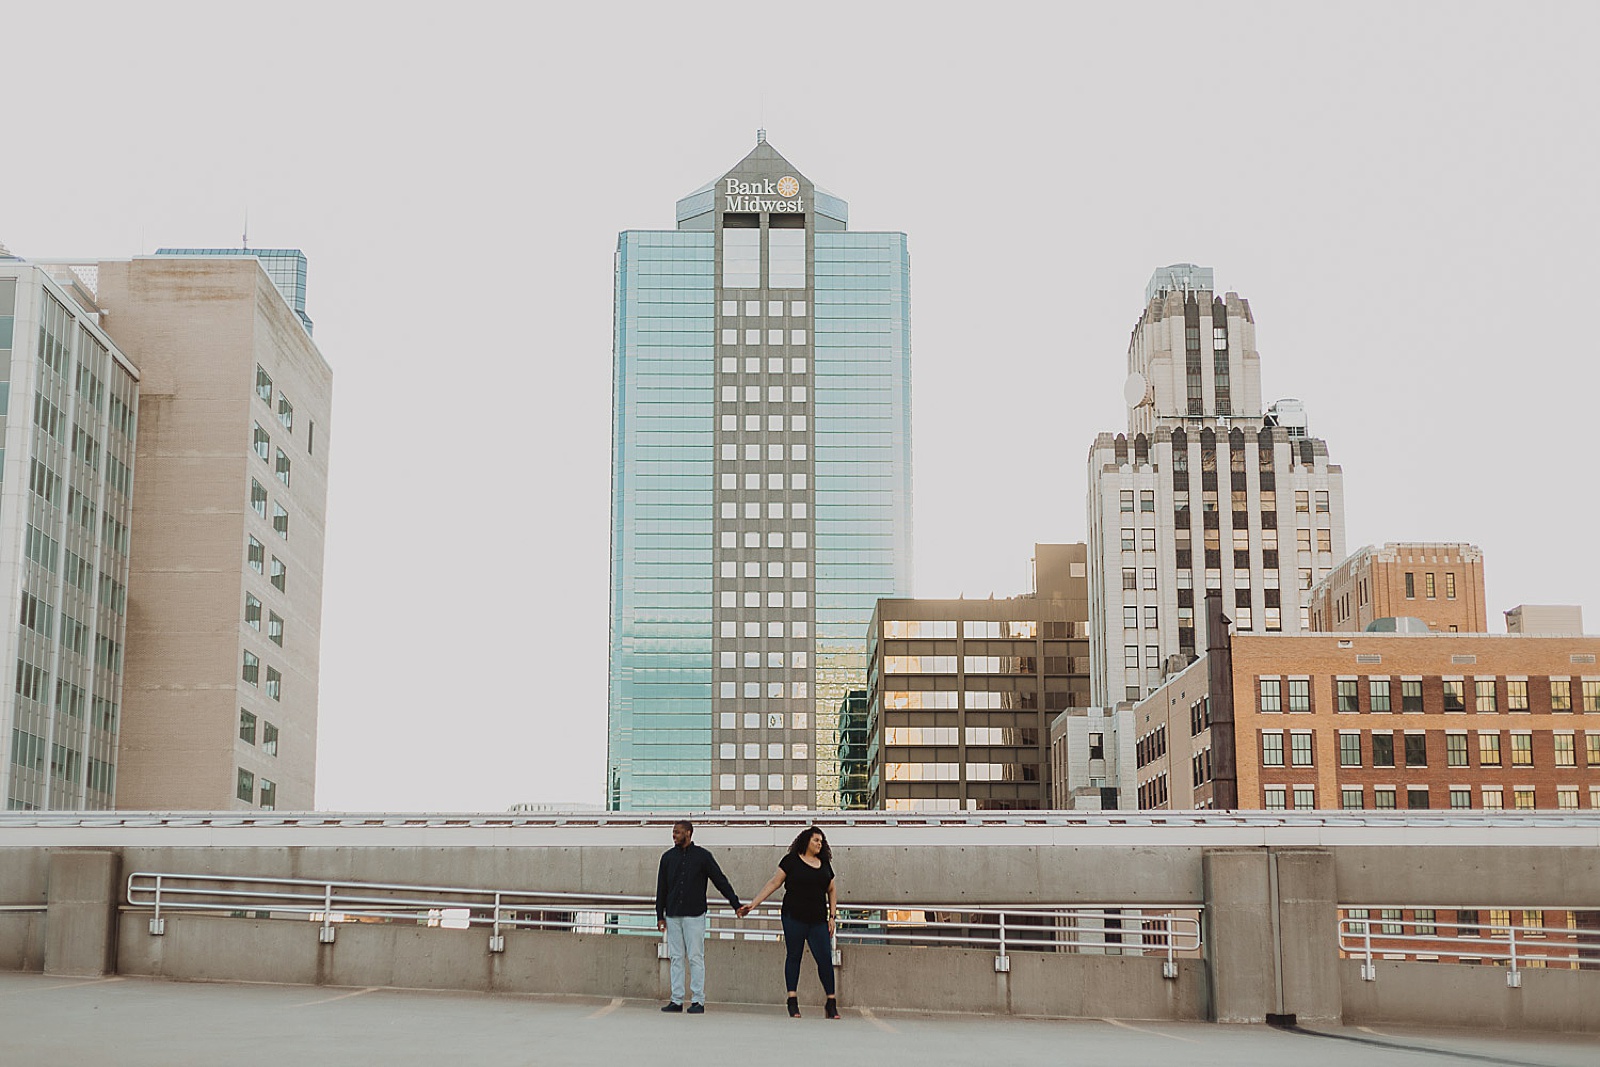 Parking garage engagement photos in Kansas City by Caitlyn Cloud Photography